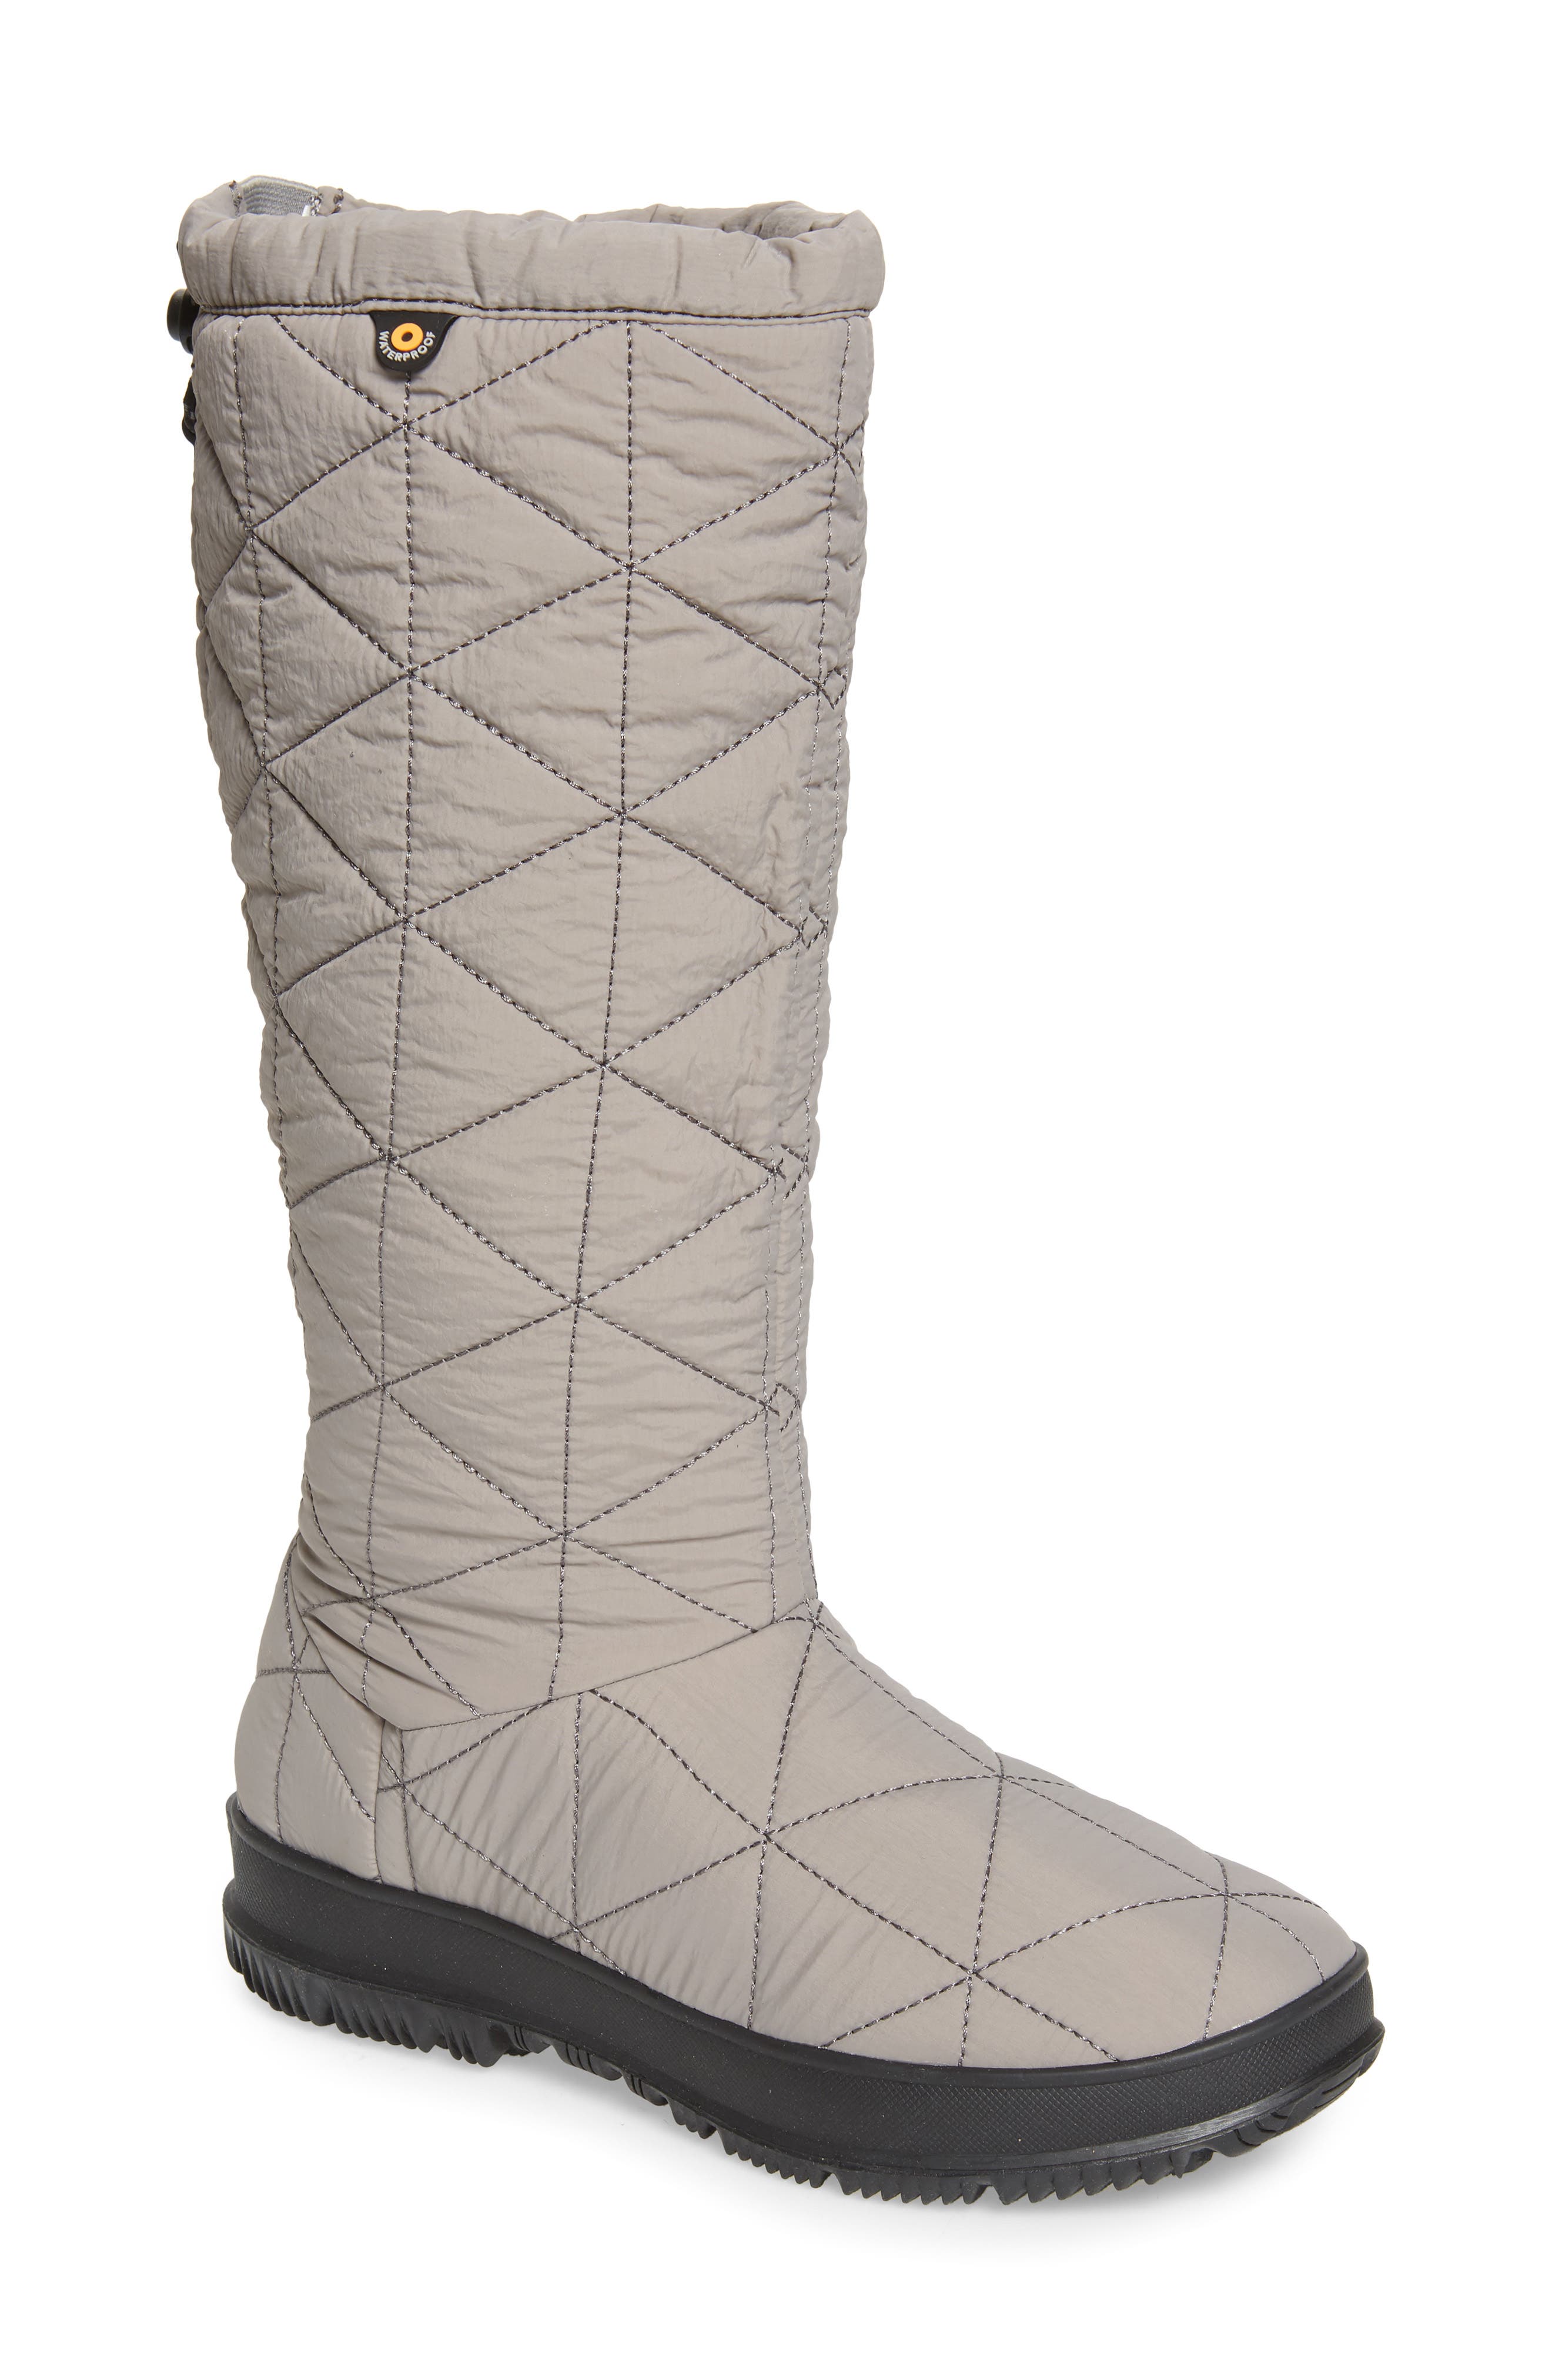 womens tall gray boots